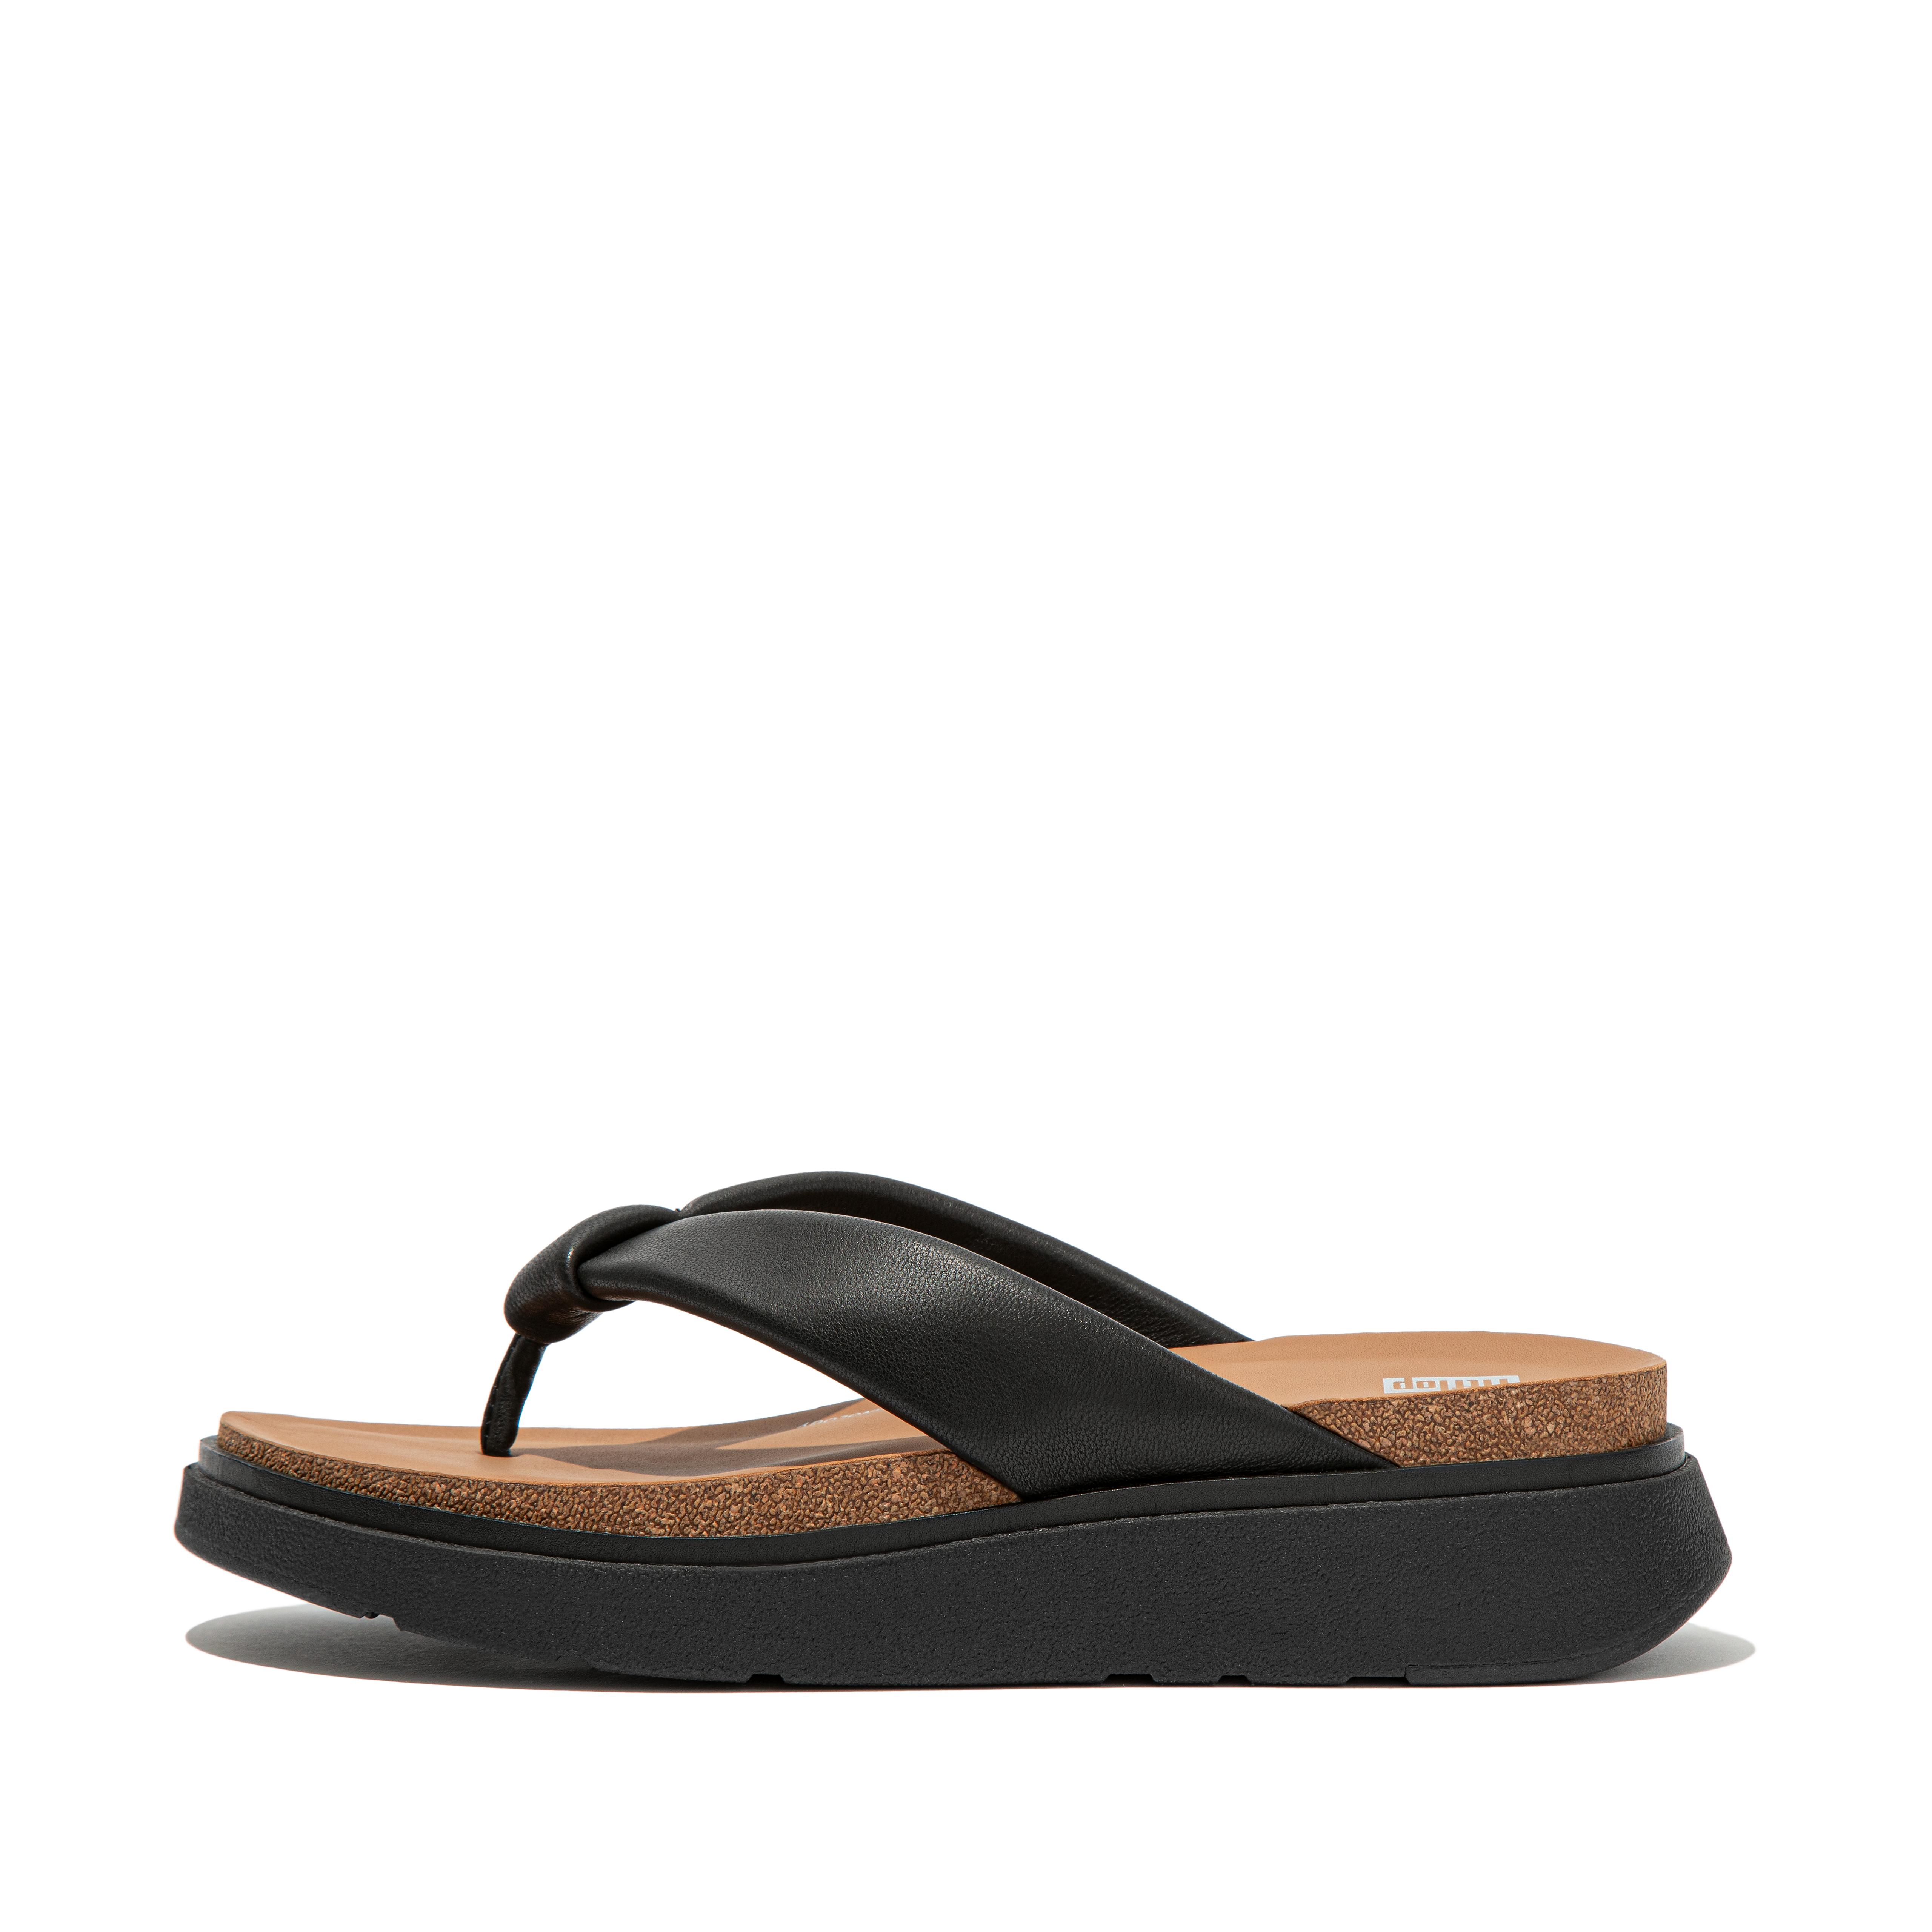 Fitflop Padded-Strap Leather Toe-Post Sandals,All Black